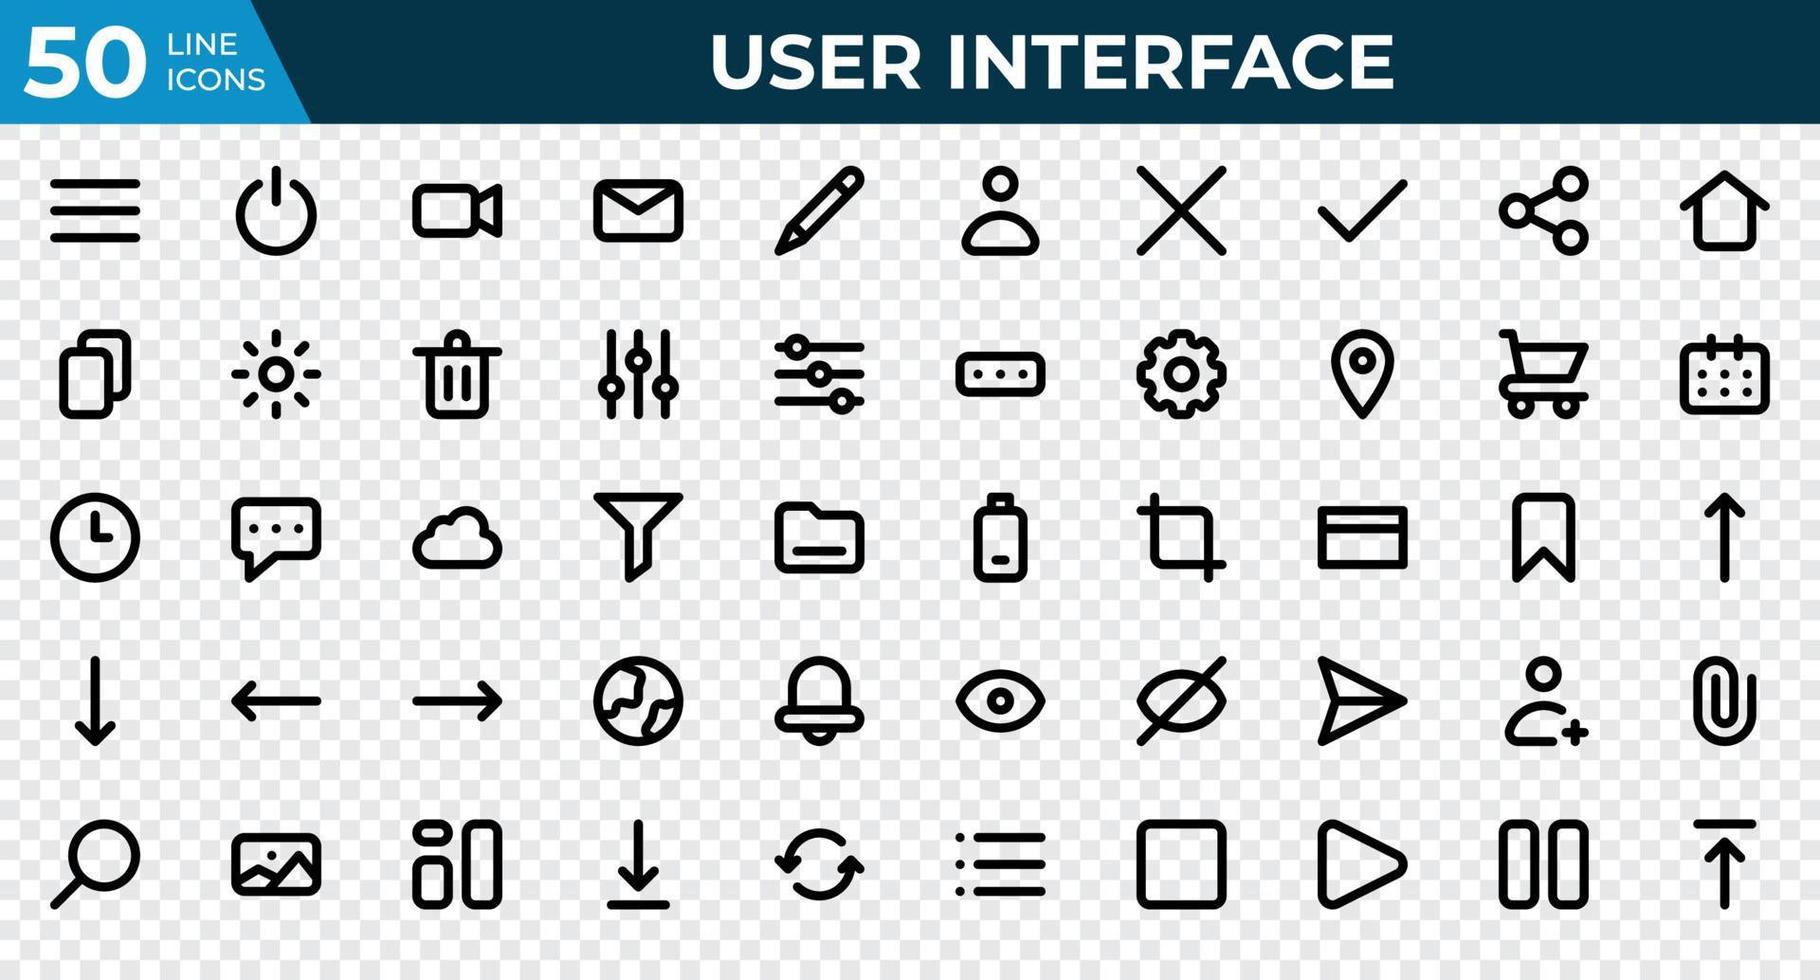 Set of 50 User Interface icons in line style. Menu, calendar, clock. Outline icons collection. Vector illustration